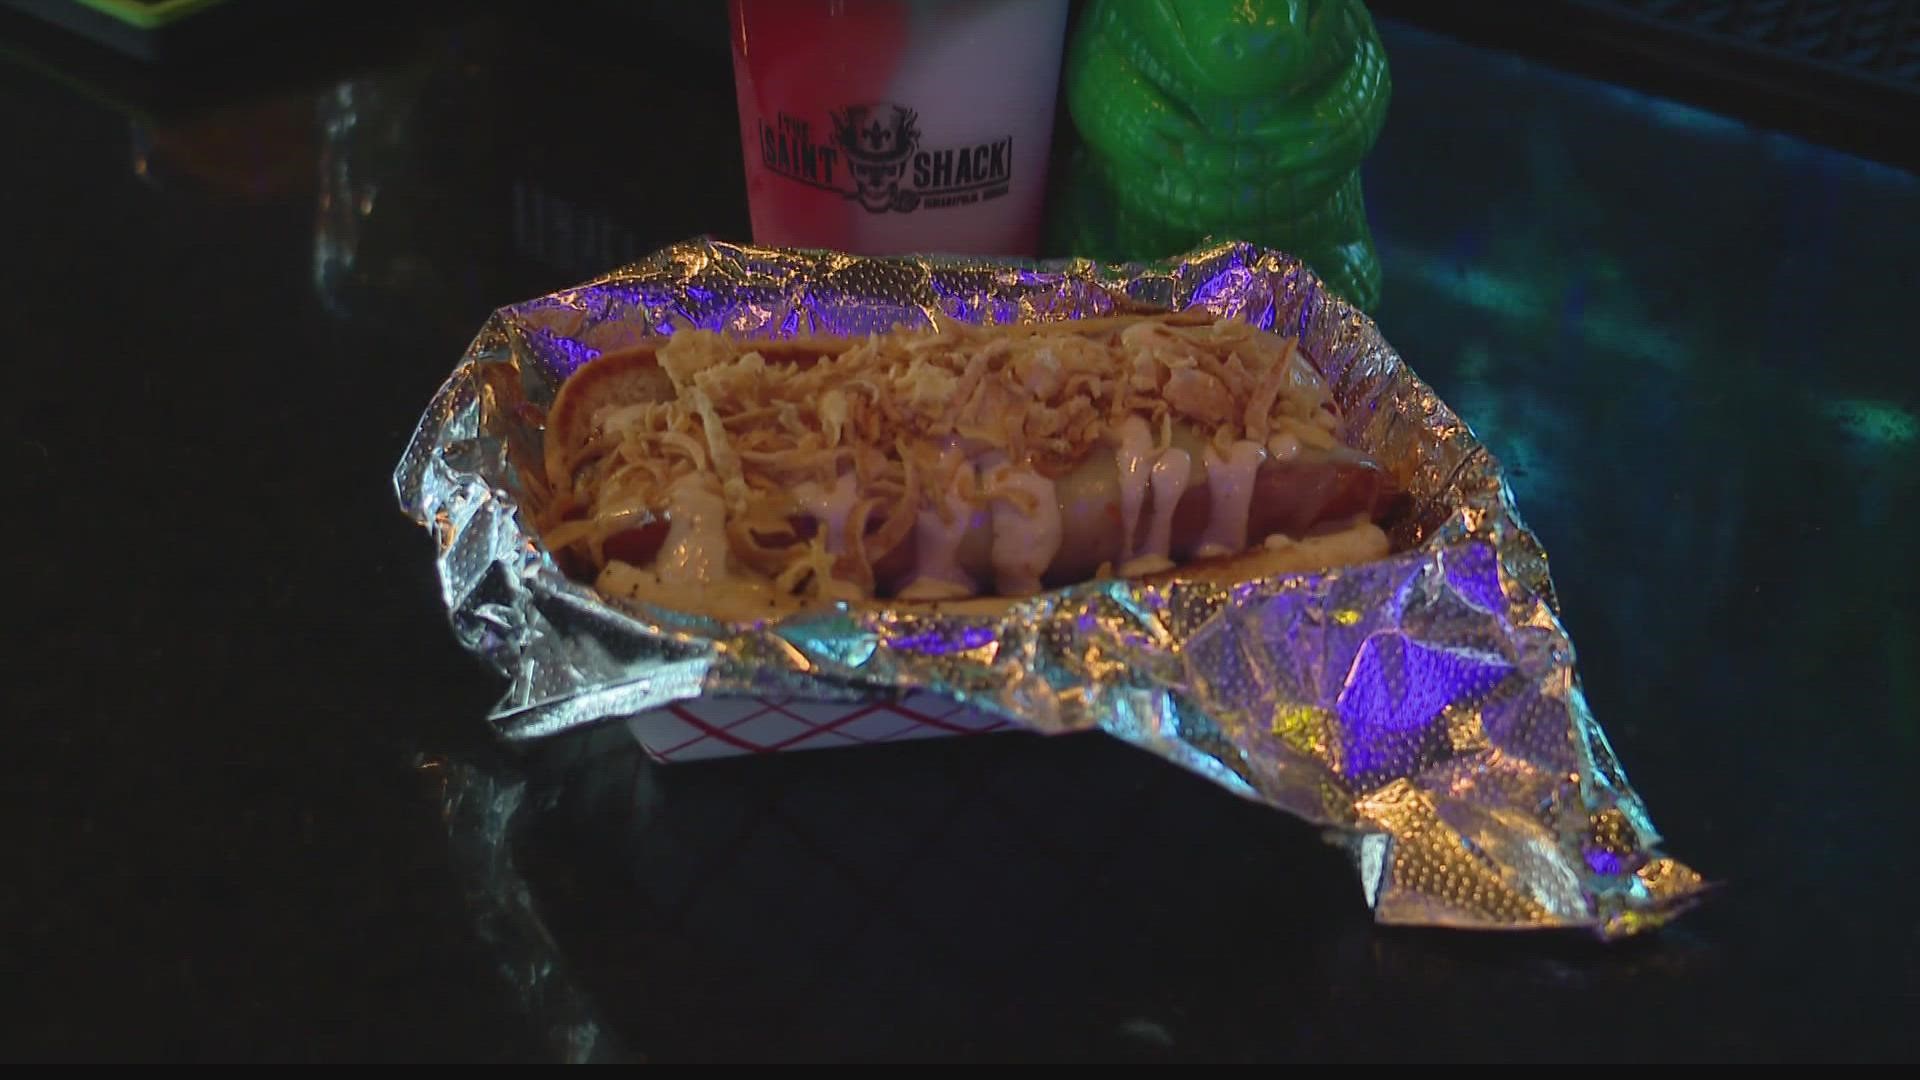 The Betty White Dog will be available at The Saint Shack through the end of January.